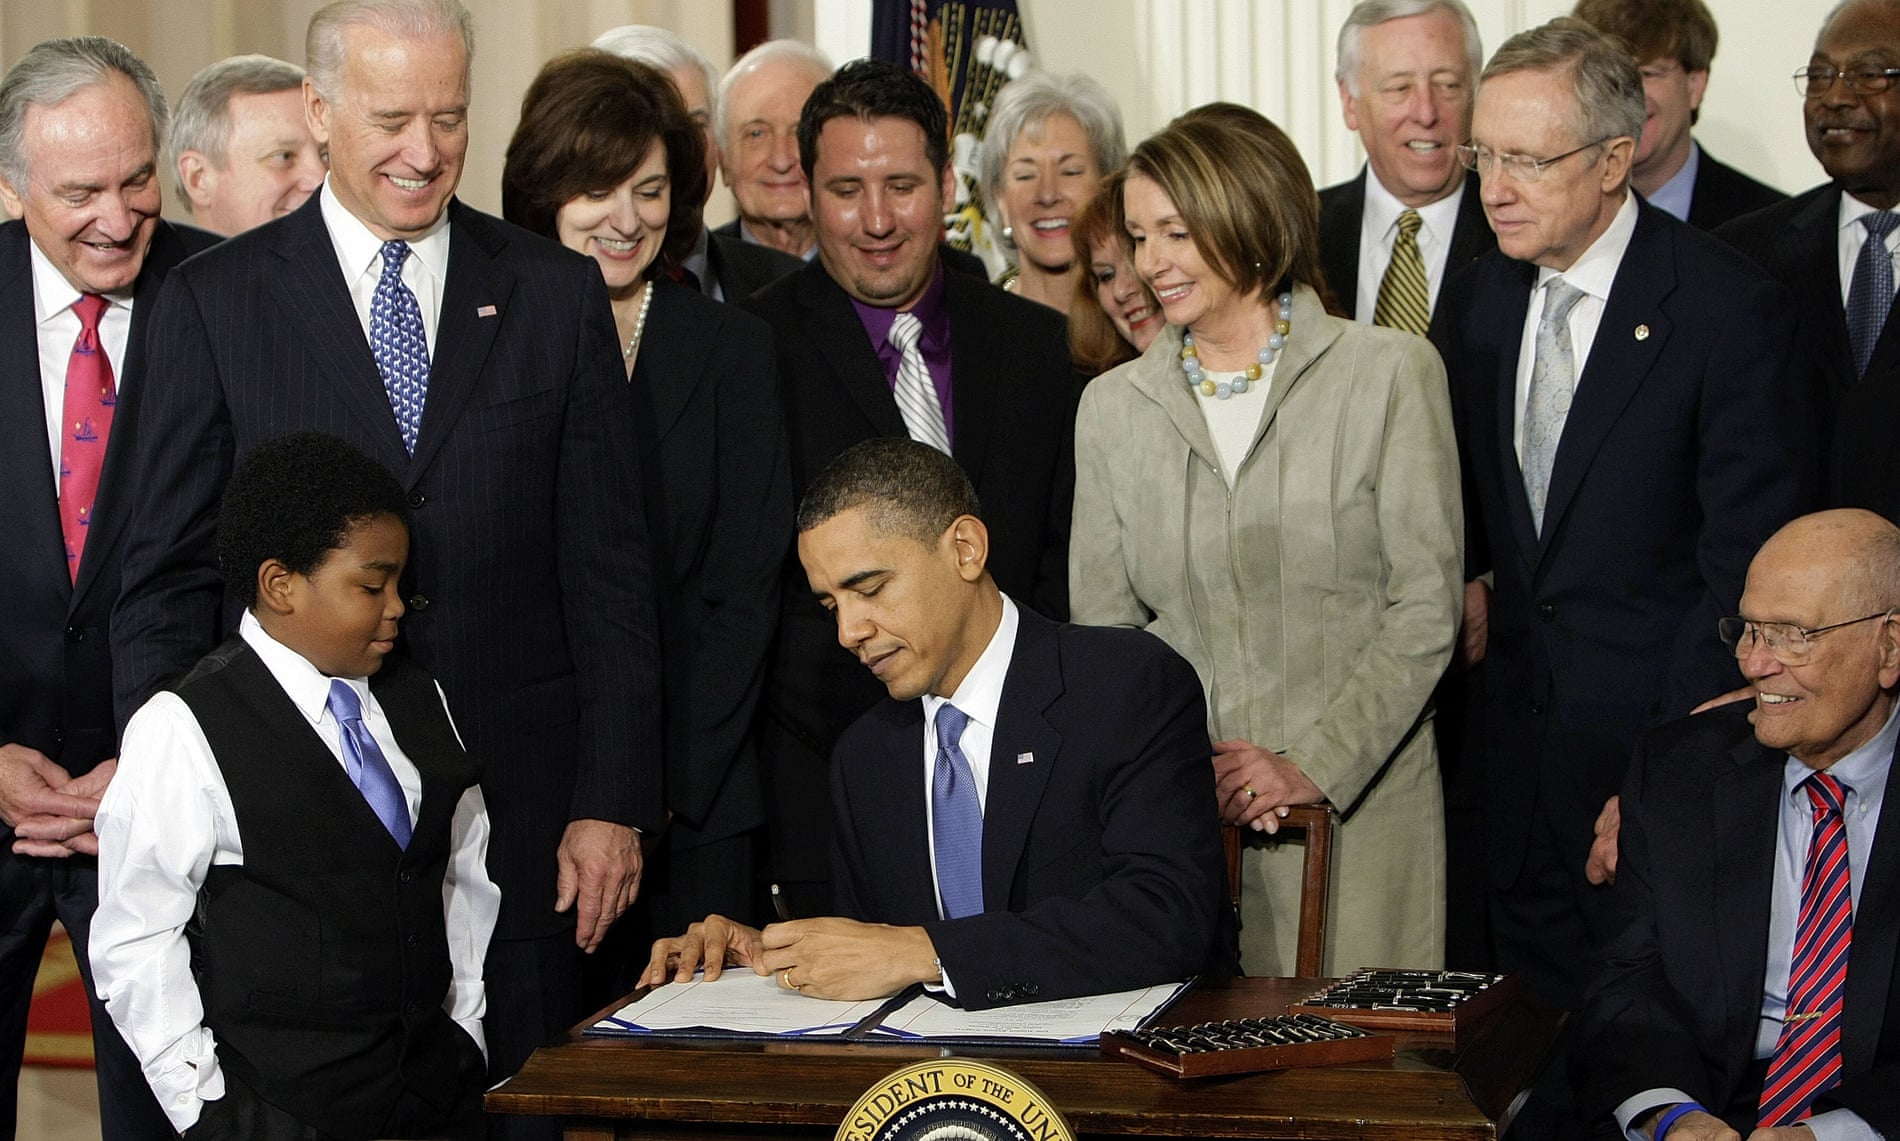 March 2010: signing the Affordable Care Act into law in the East Room of the White House.